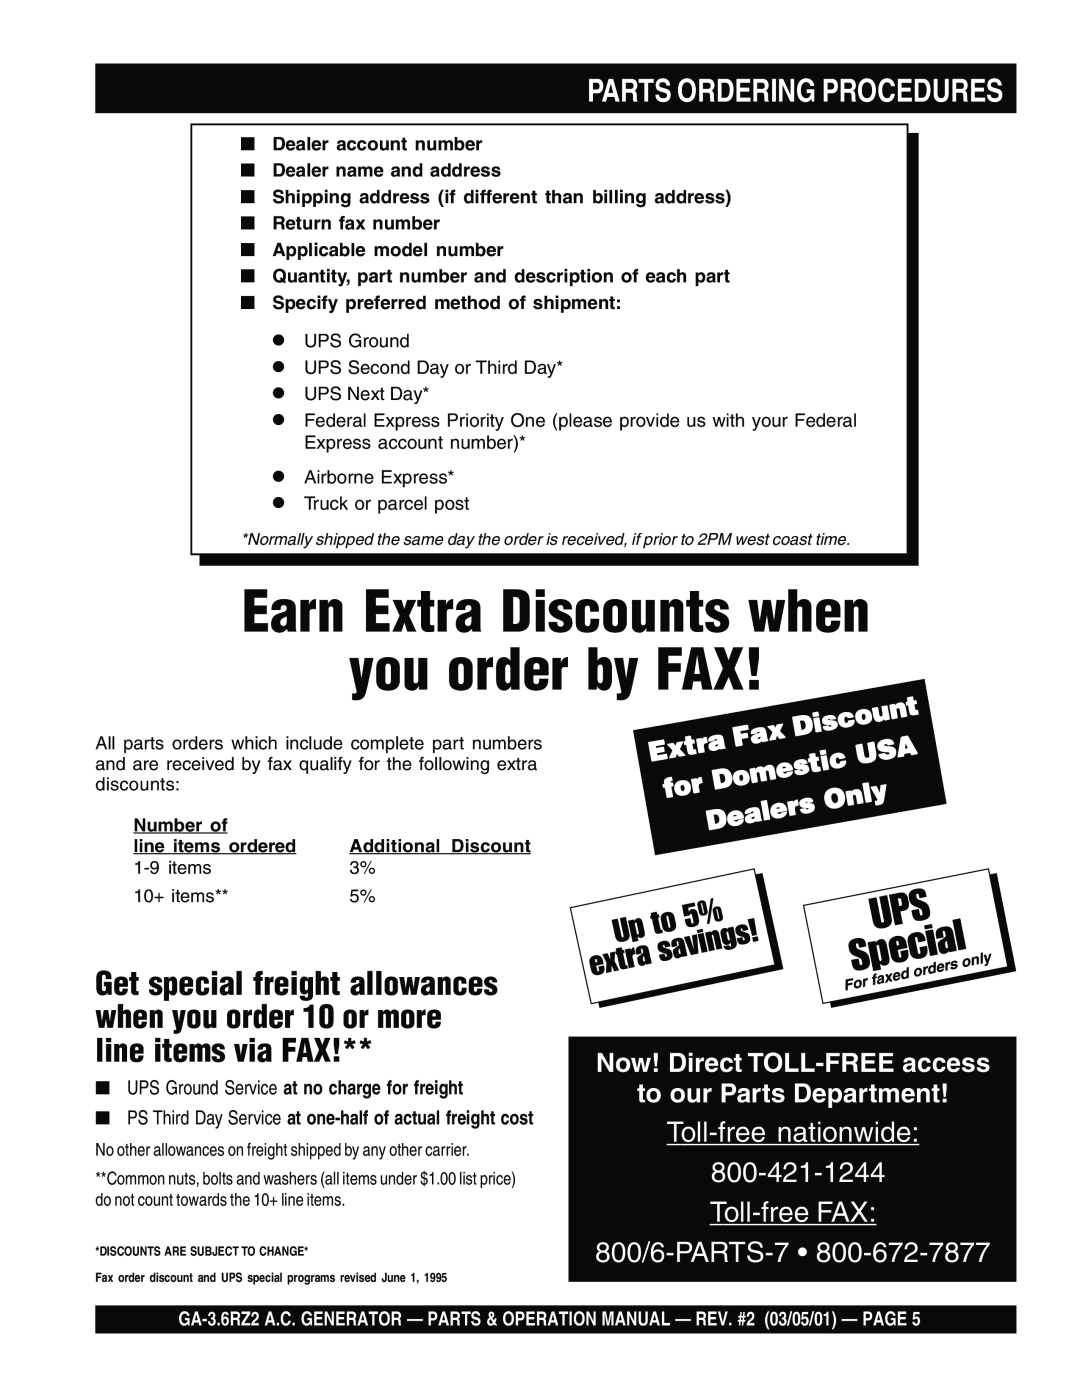 Multiquip GA-3.6RZ2 Earn Extra Discounts when you order by FAX, Parts Ordering Procedures, Domestic, Dealers, Only 